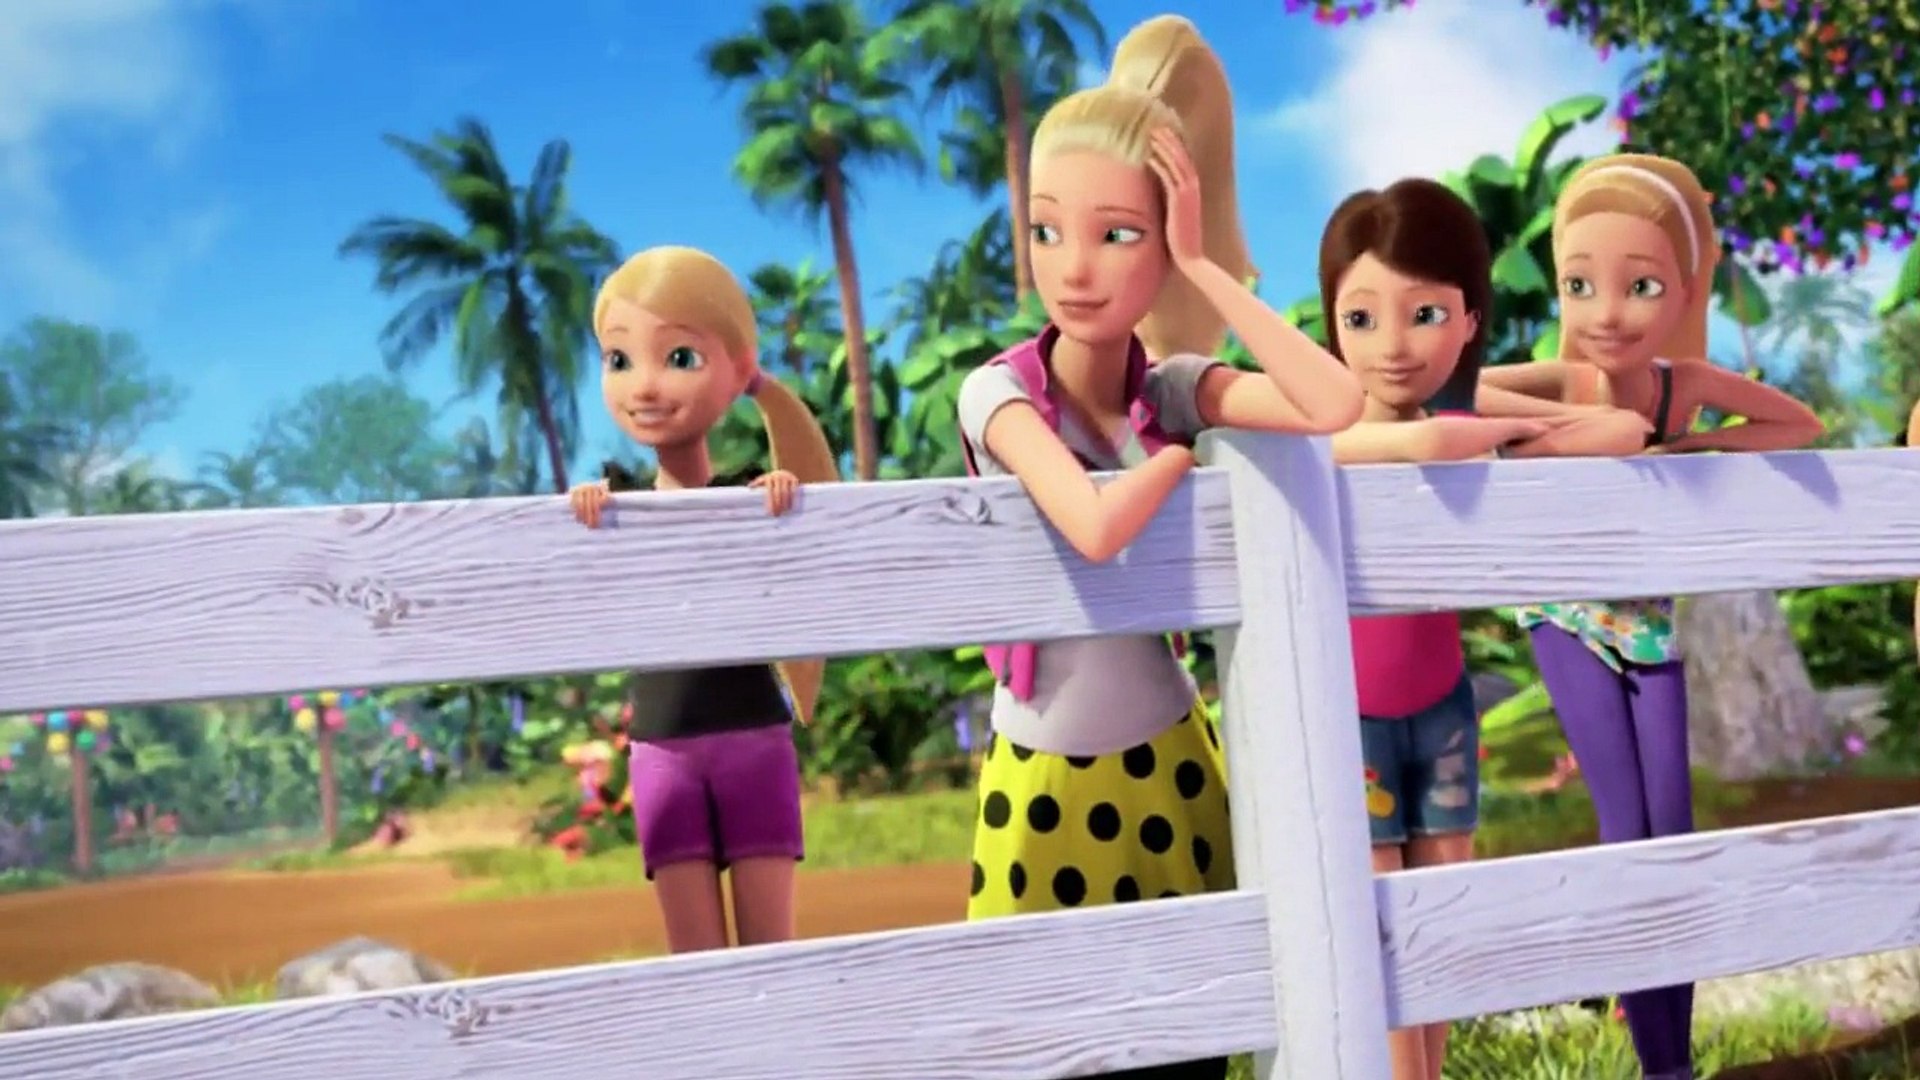 barbie and her sisters in the great puppy adventure full movie in hindi